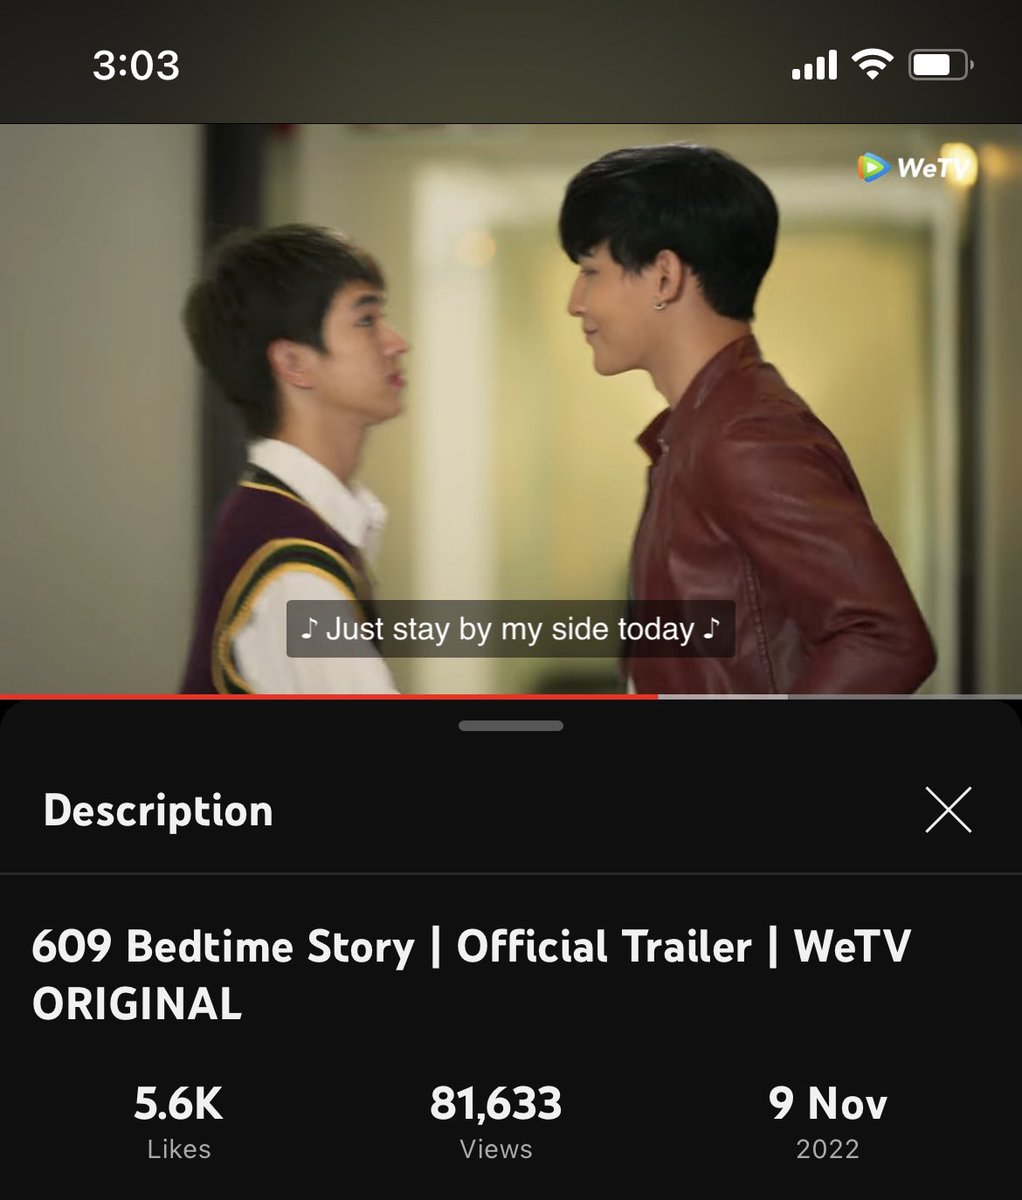 Continue with the tag & steam the trailer!
🔗 youtu.be/dHlfjy16A8w
#609OfficialTrailer

🏷 89.8k, 10.2k to 100k
YoutubeTeaser: 81,633, 18,367 to 100k
Teaser in WeTV: 73k
24 hours Countdown: < 4hours

#เจ้าแก้มก้อน #fluke_natouch
#โอห์มไง #OhmThitiwat
#OhmFluke #โอห์มฟลุ้ค